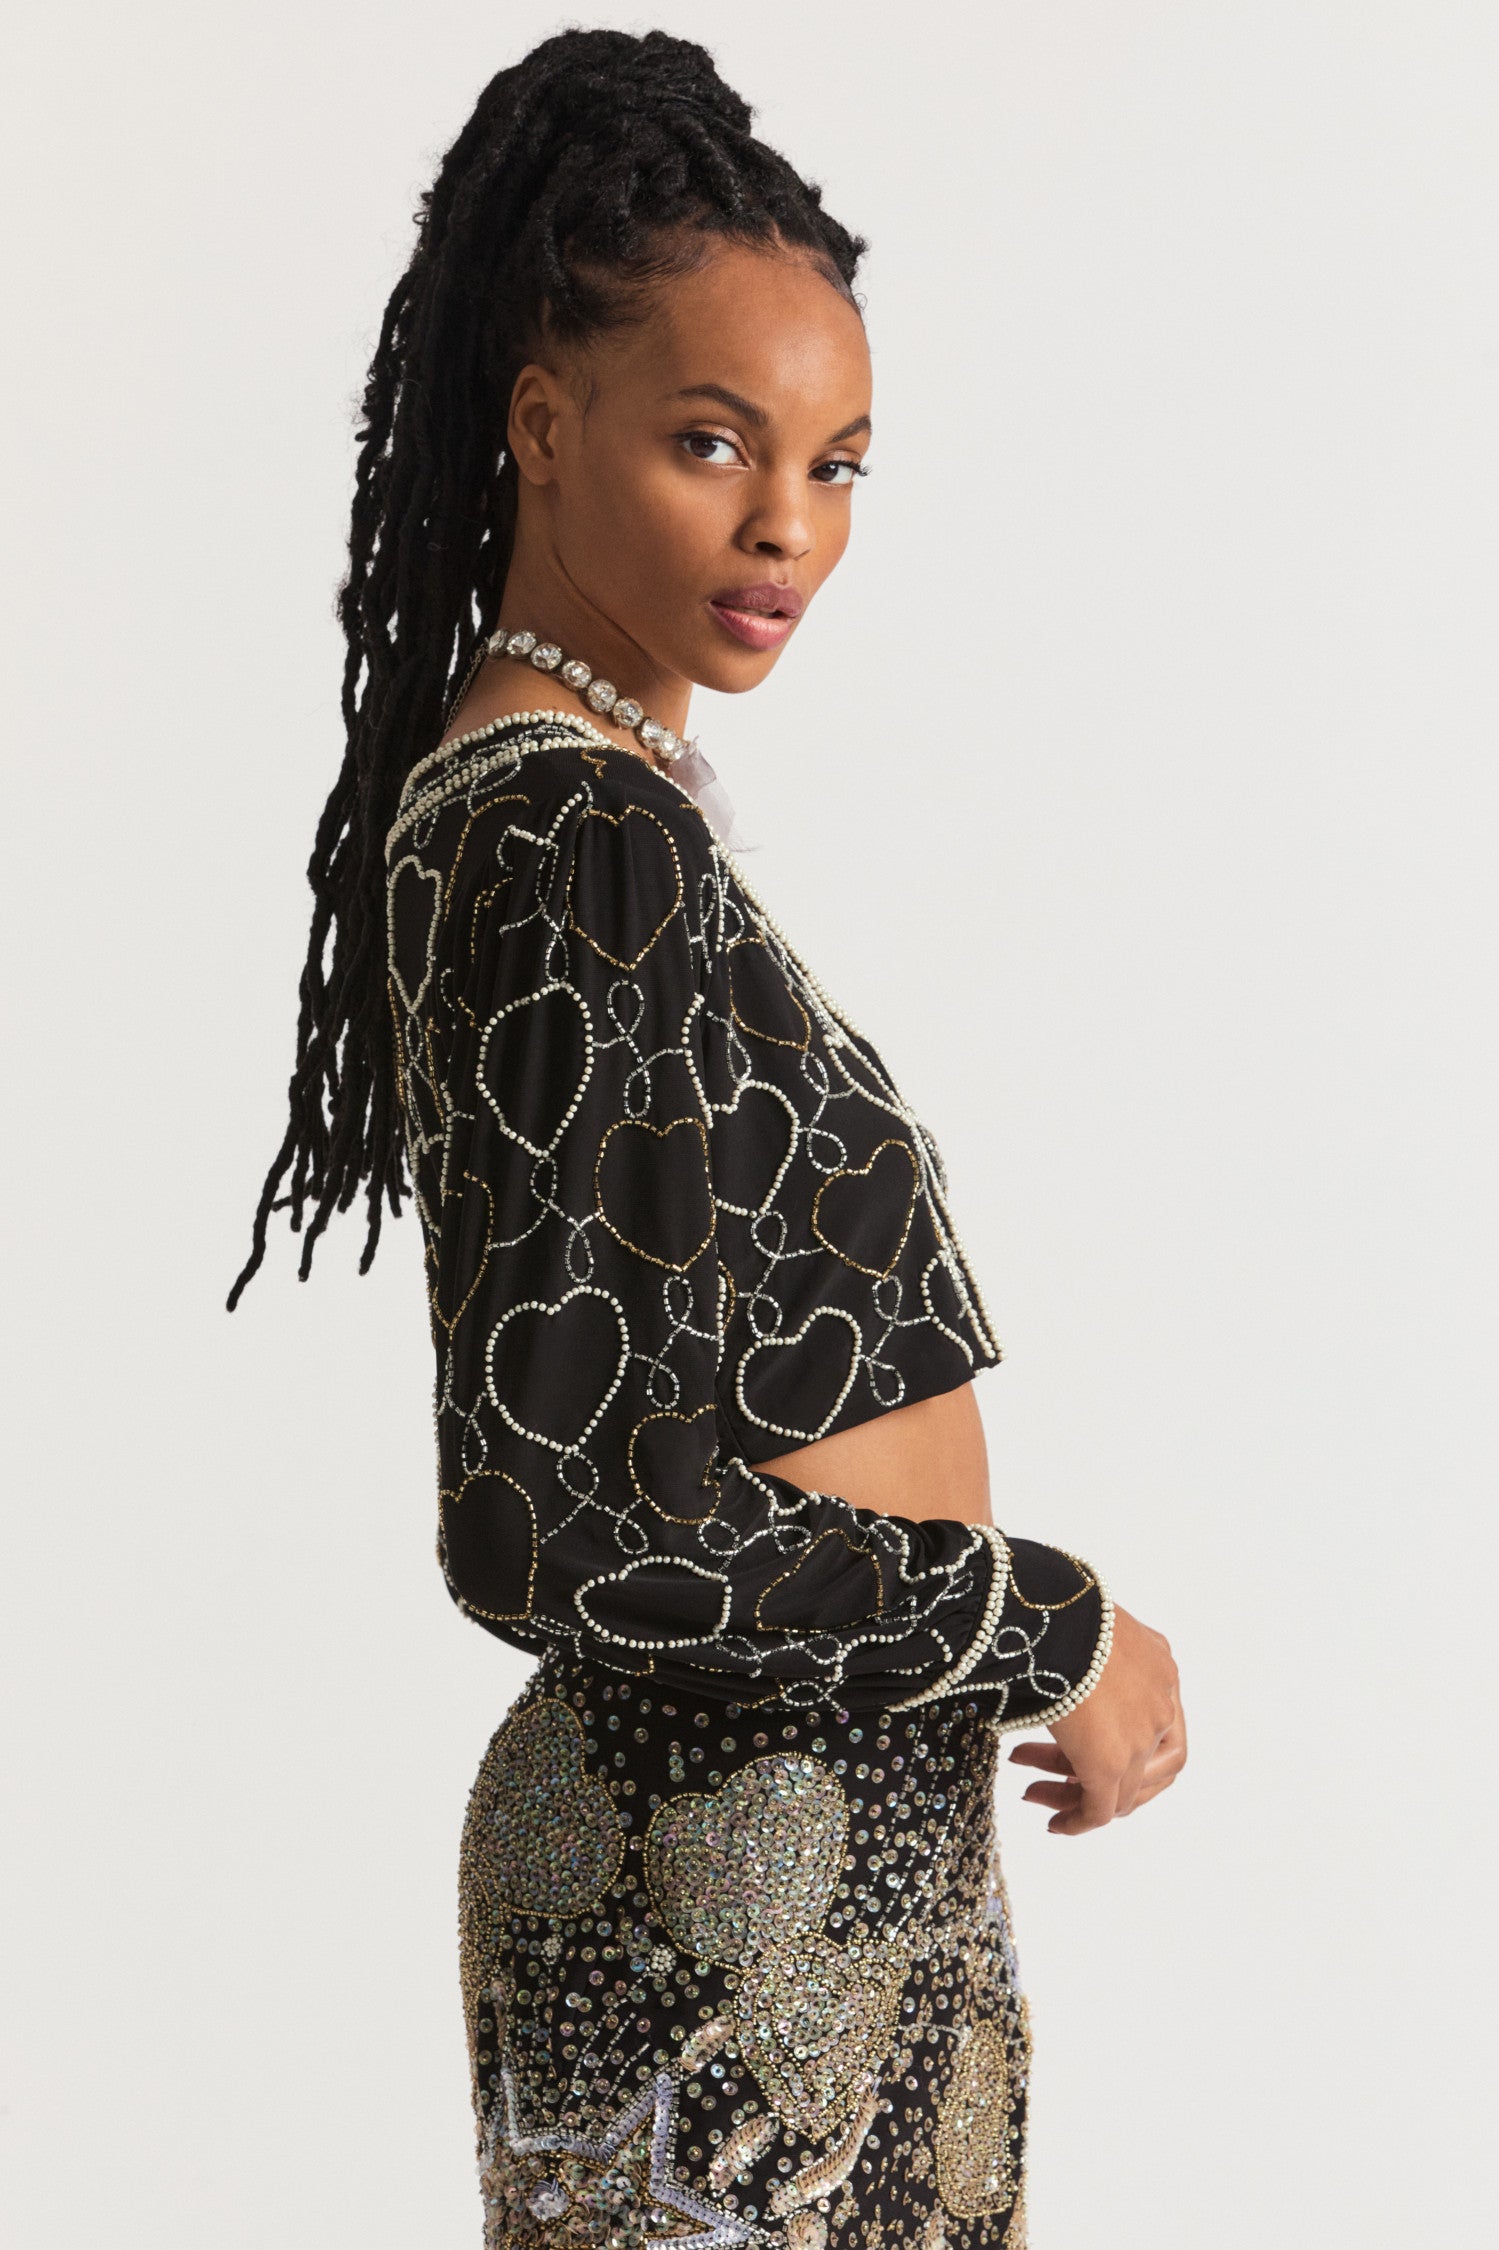 Black Crop Cardigan with heart design in iridescent silver and gold beads blended together on a stretchy crepe fabric. The collar and cuff feature delicate borders of beads.